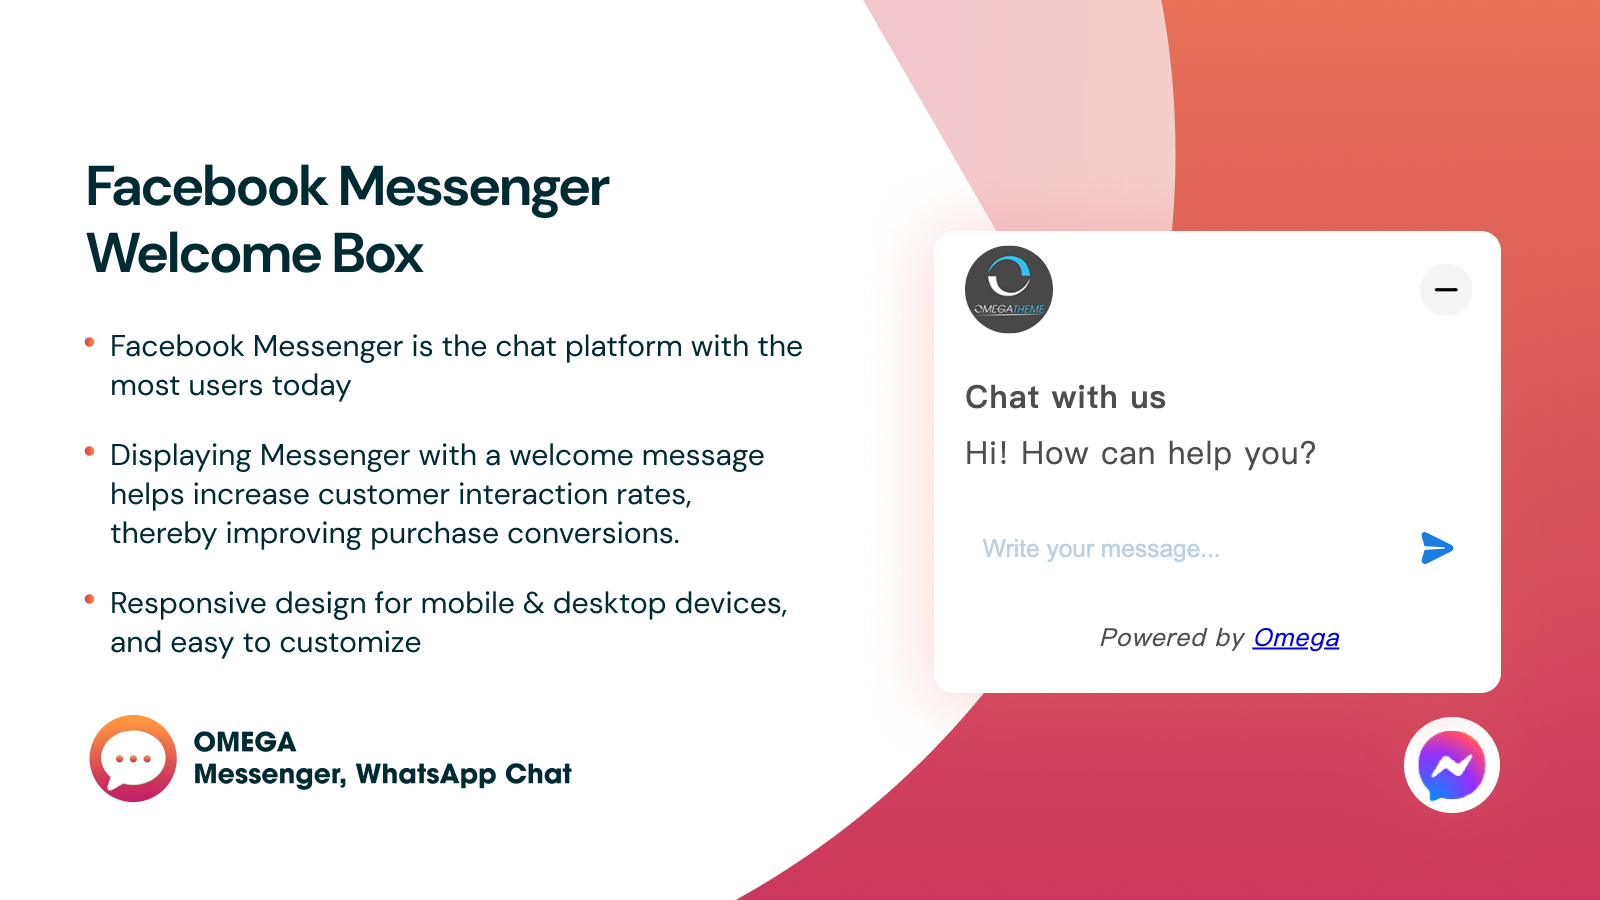 All-in-one platform to manage chat/message